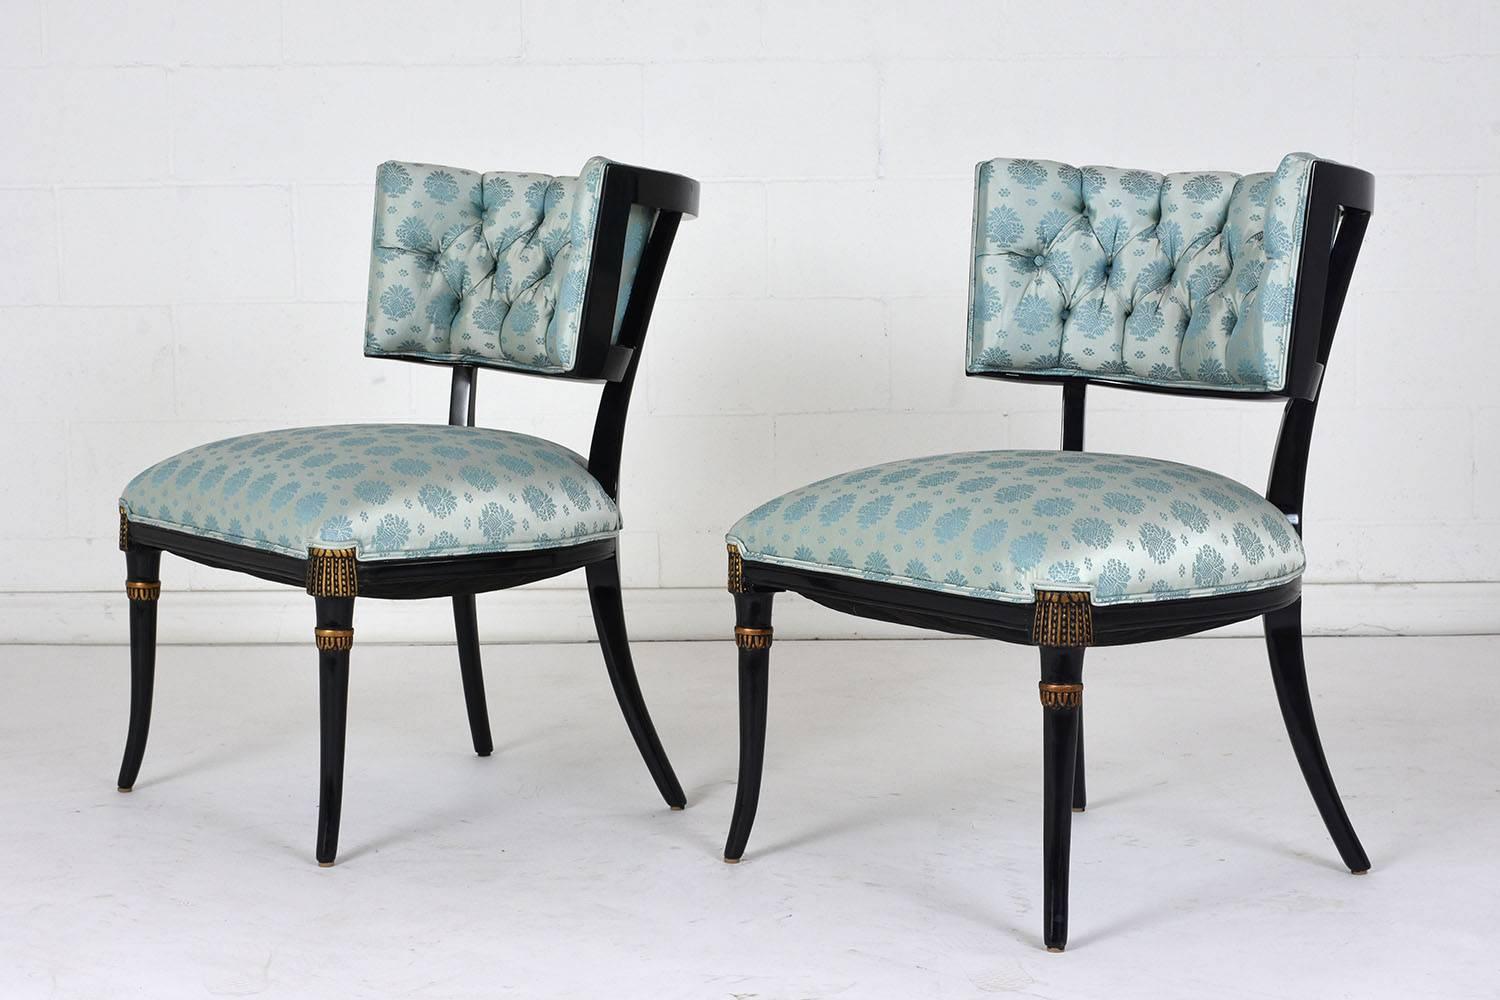 Carved Pair of Midcentury Regency-Style Ebonized Lounge Chairs